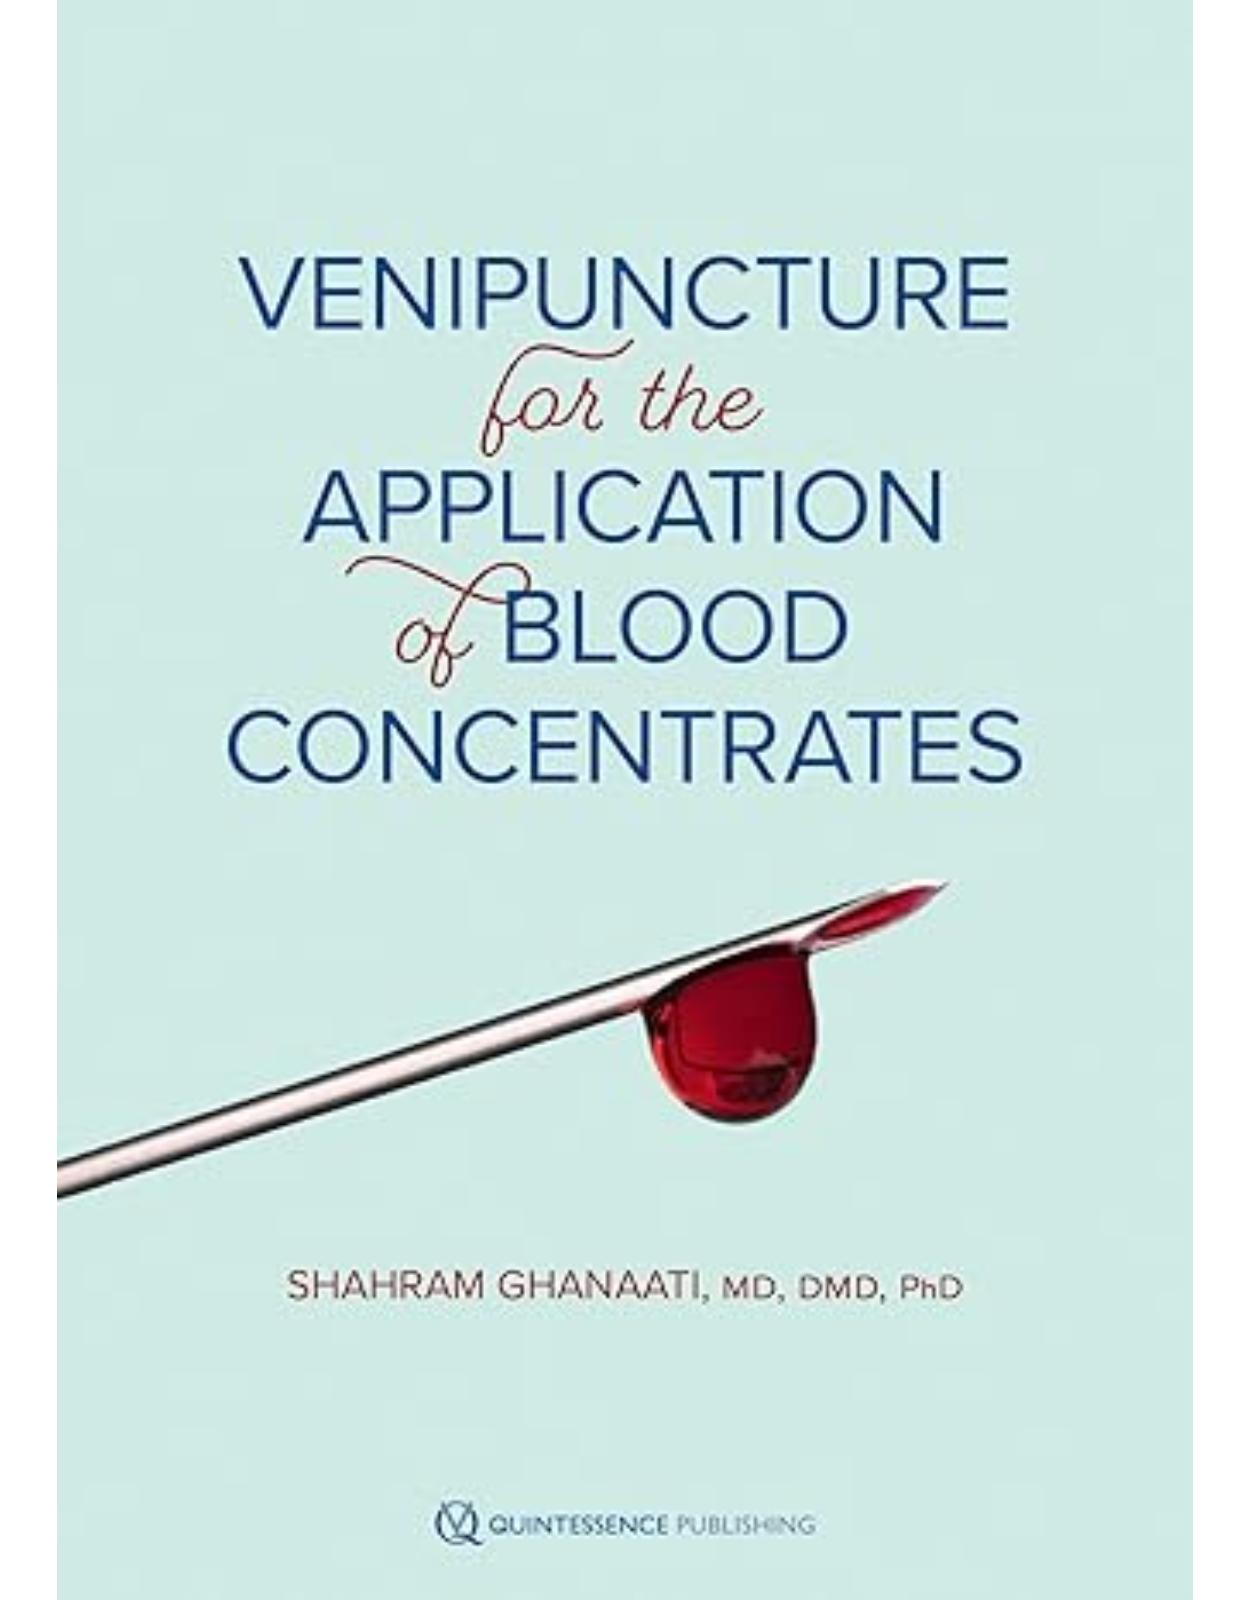 Venipuncture for the Application of Blood Concentrates